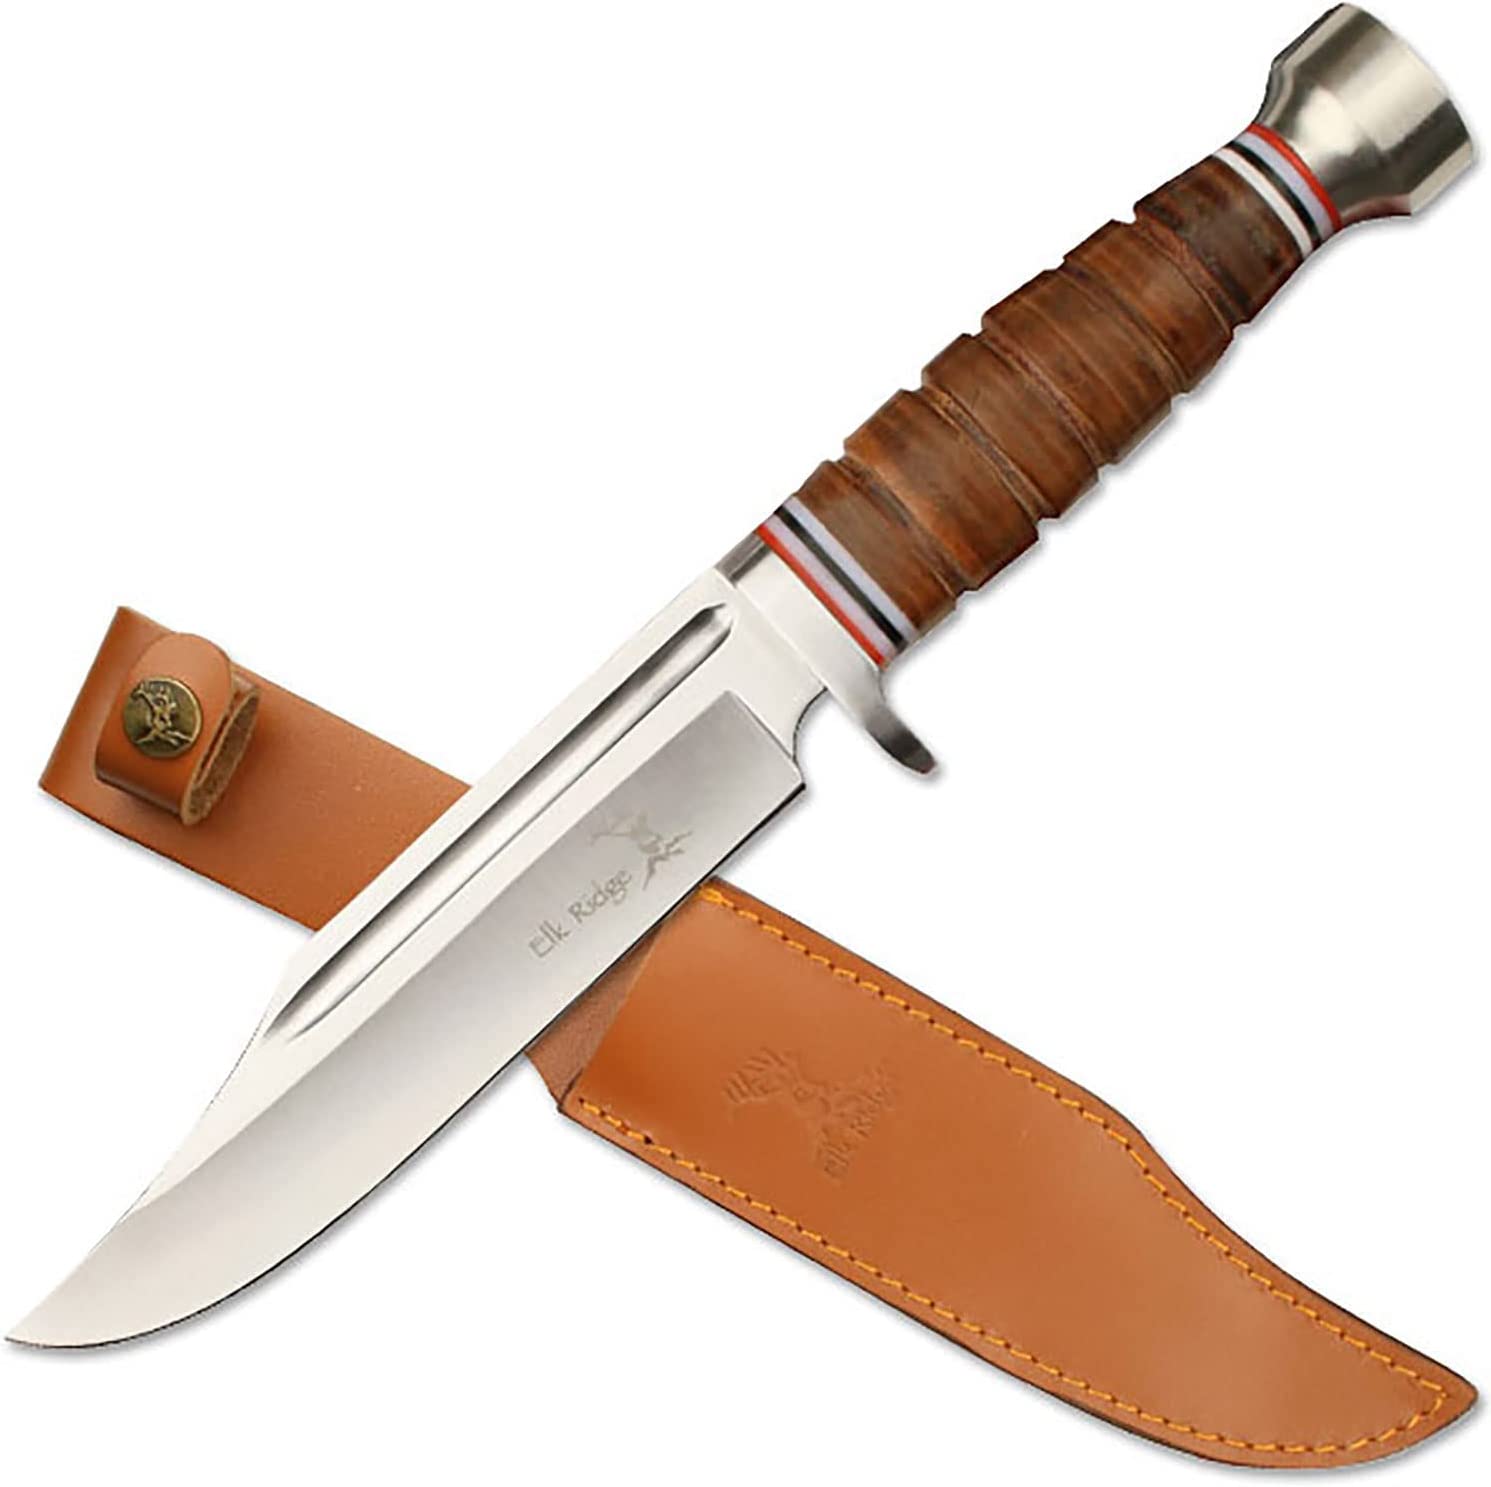 Elk Ridge – Outdoors Fixed Blade Knife – 12-in Overall, 6.25-in Stainless Steel Blade, Full Tang Knife, Leather Wrapped Handle, Leather Sheath – Hunting, Camping, Survival – ER-047